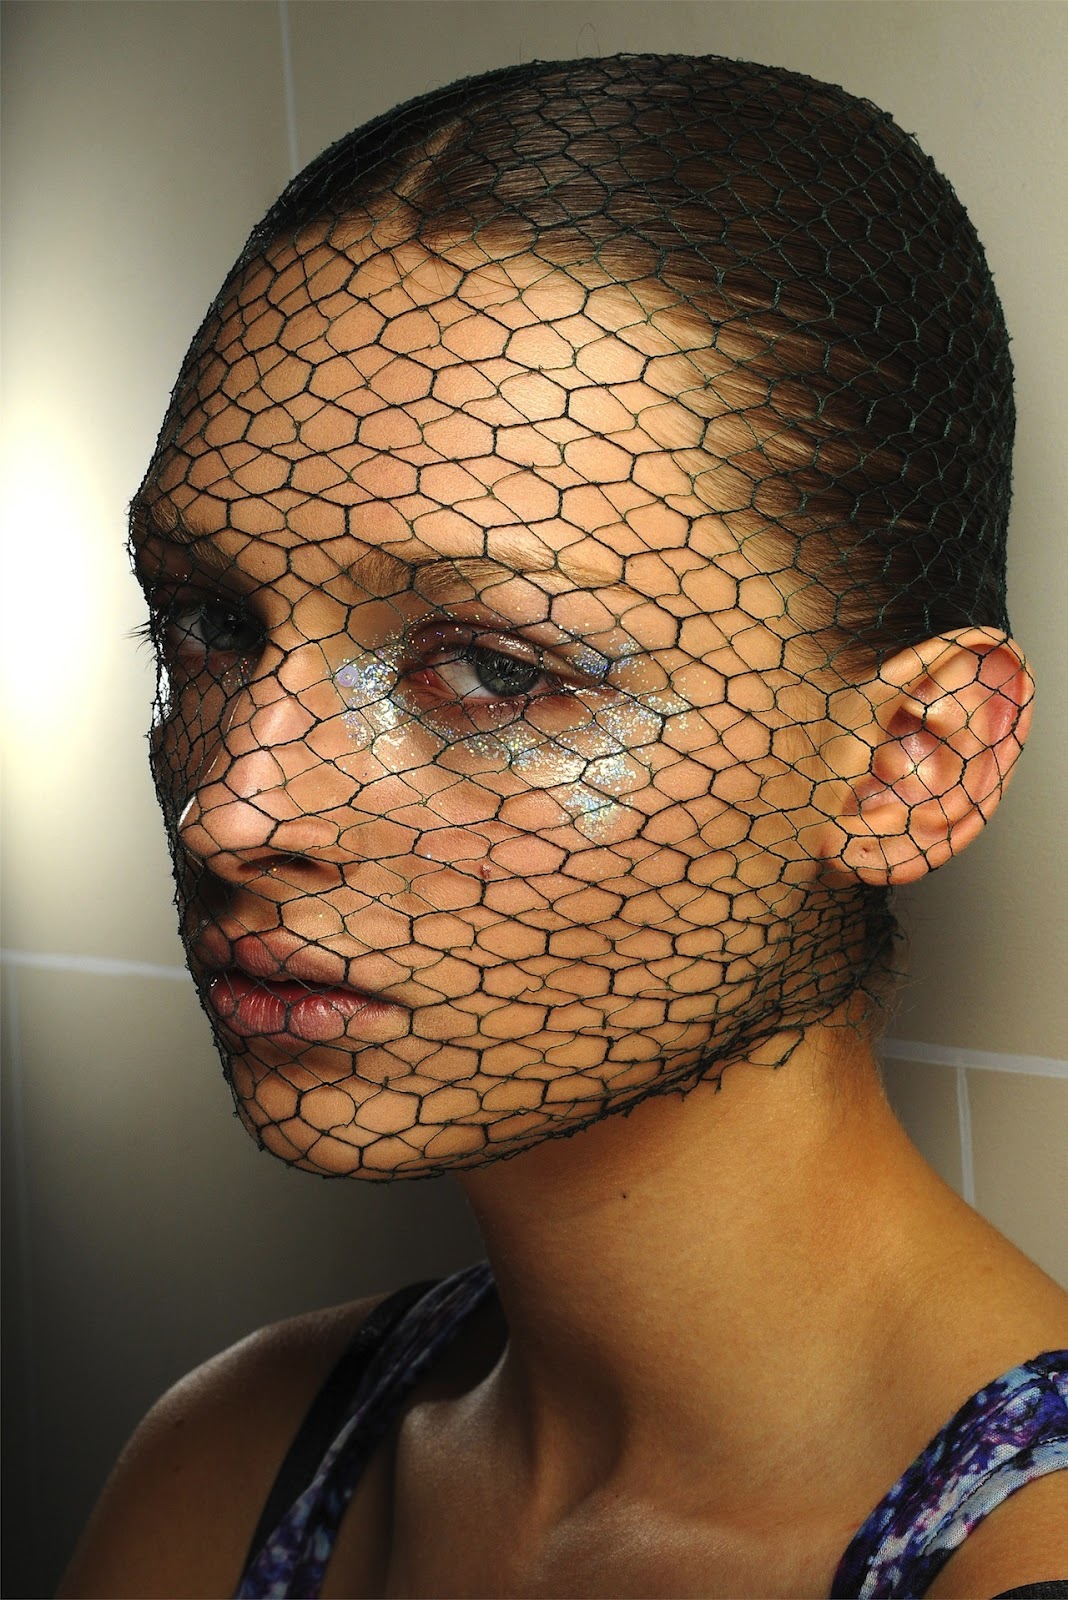 some of my favourite beauty looks from haute couture f/w 12.13 ...